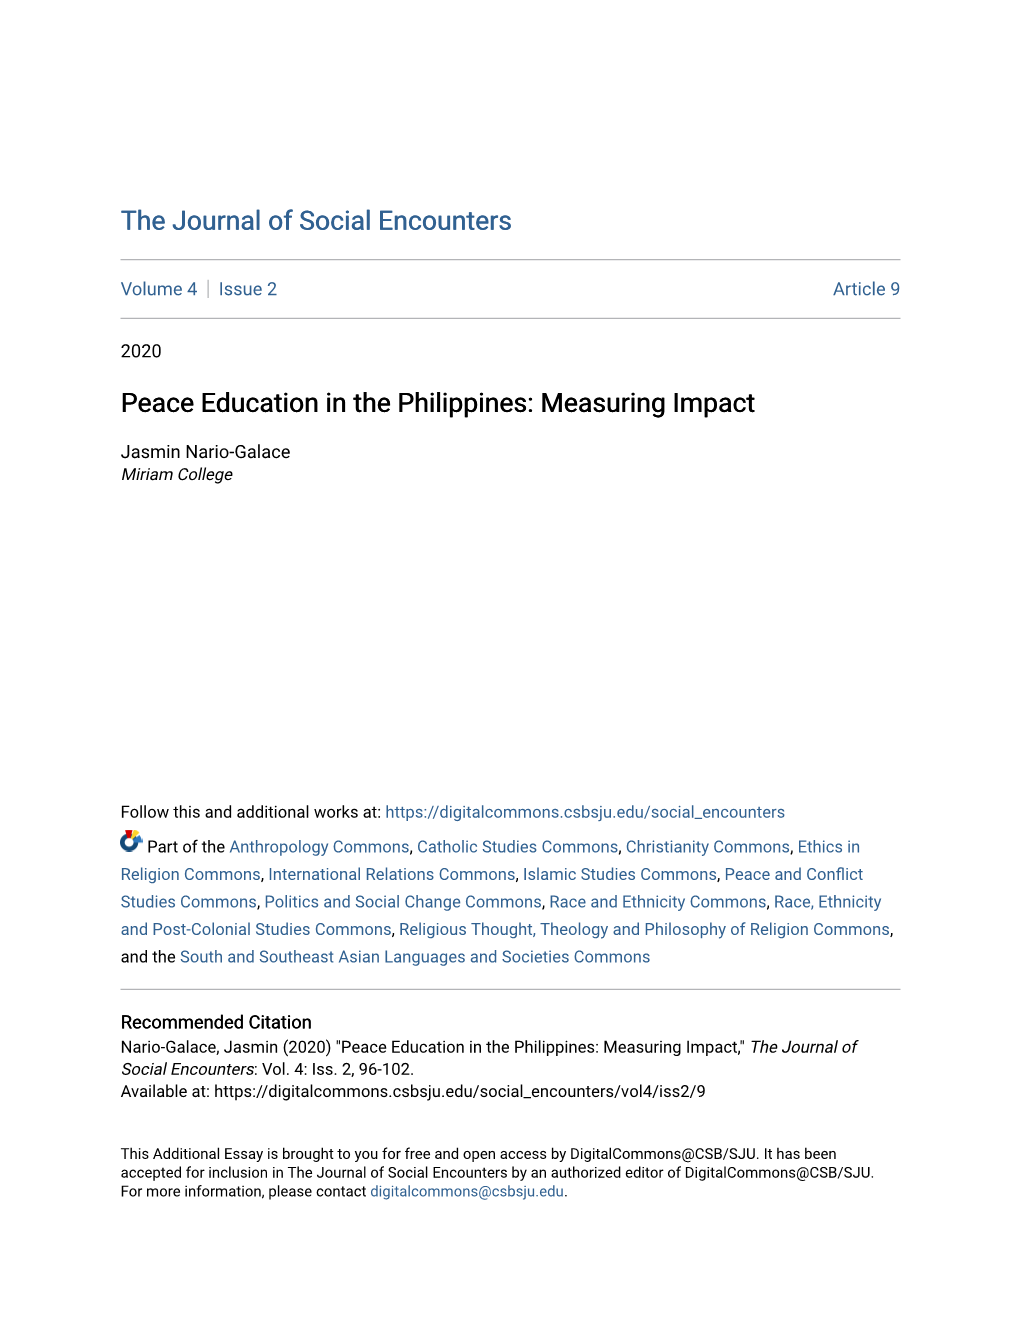 Peace Education in the Philippines: Measuring Impact